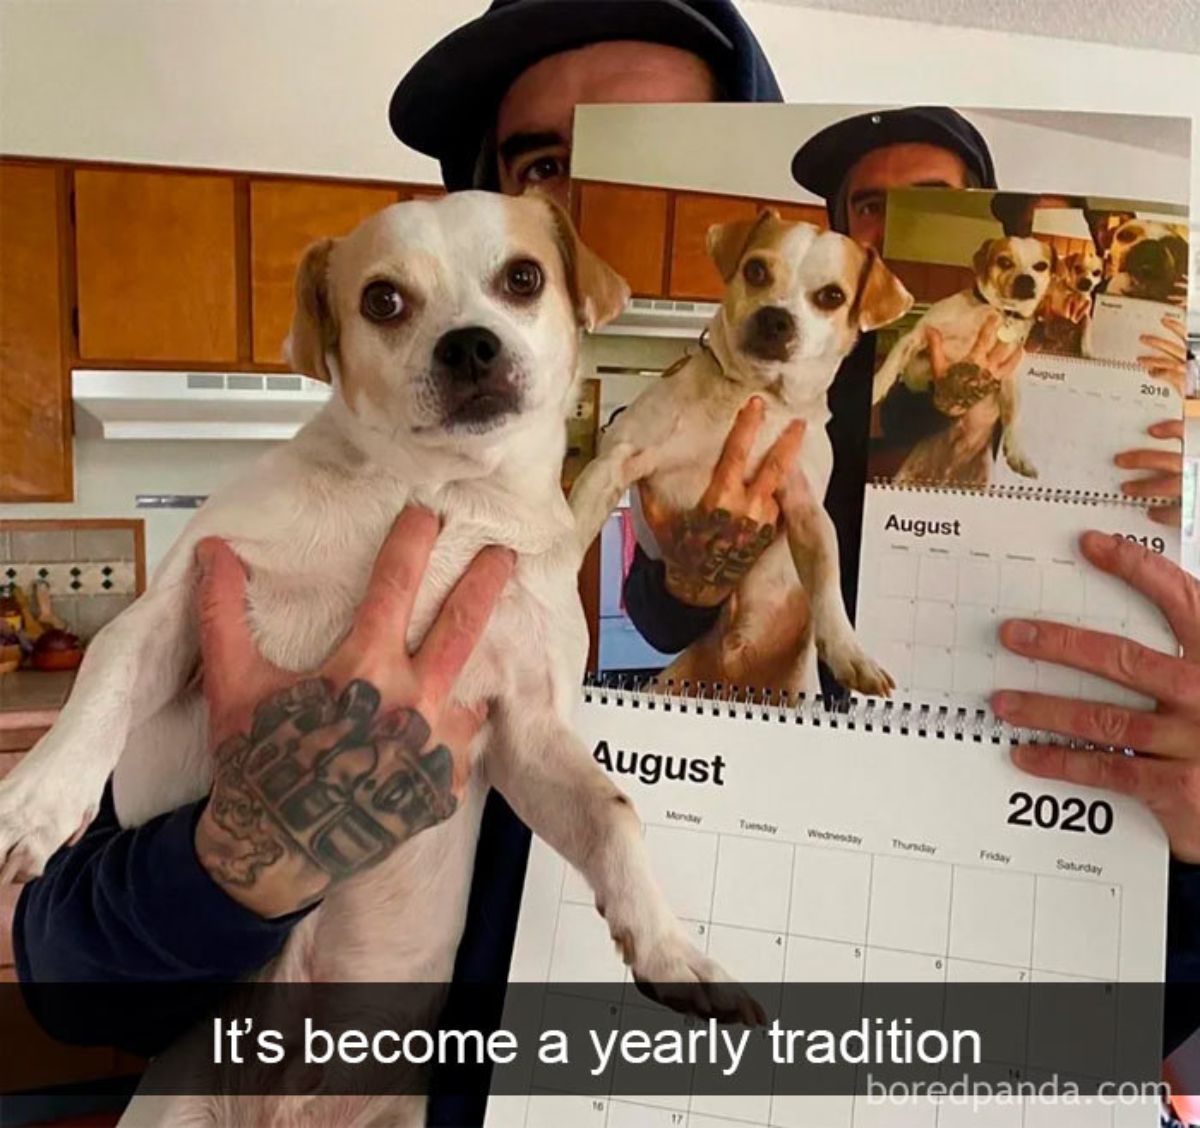 man holding up brown and white dog next to a calendar that has an image of this with a caption saying it's become a yearly tradition